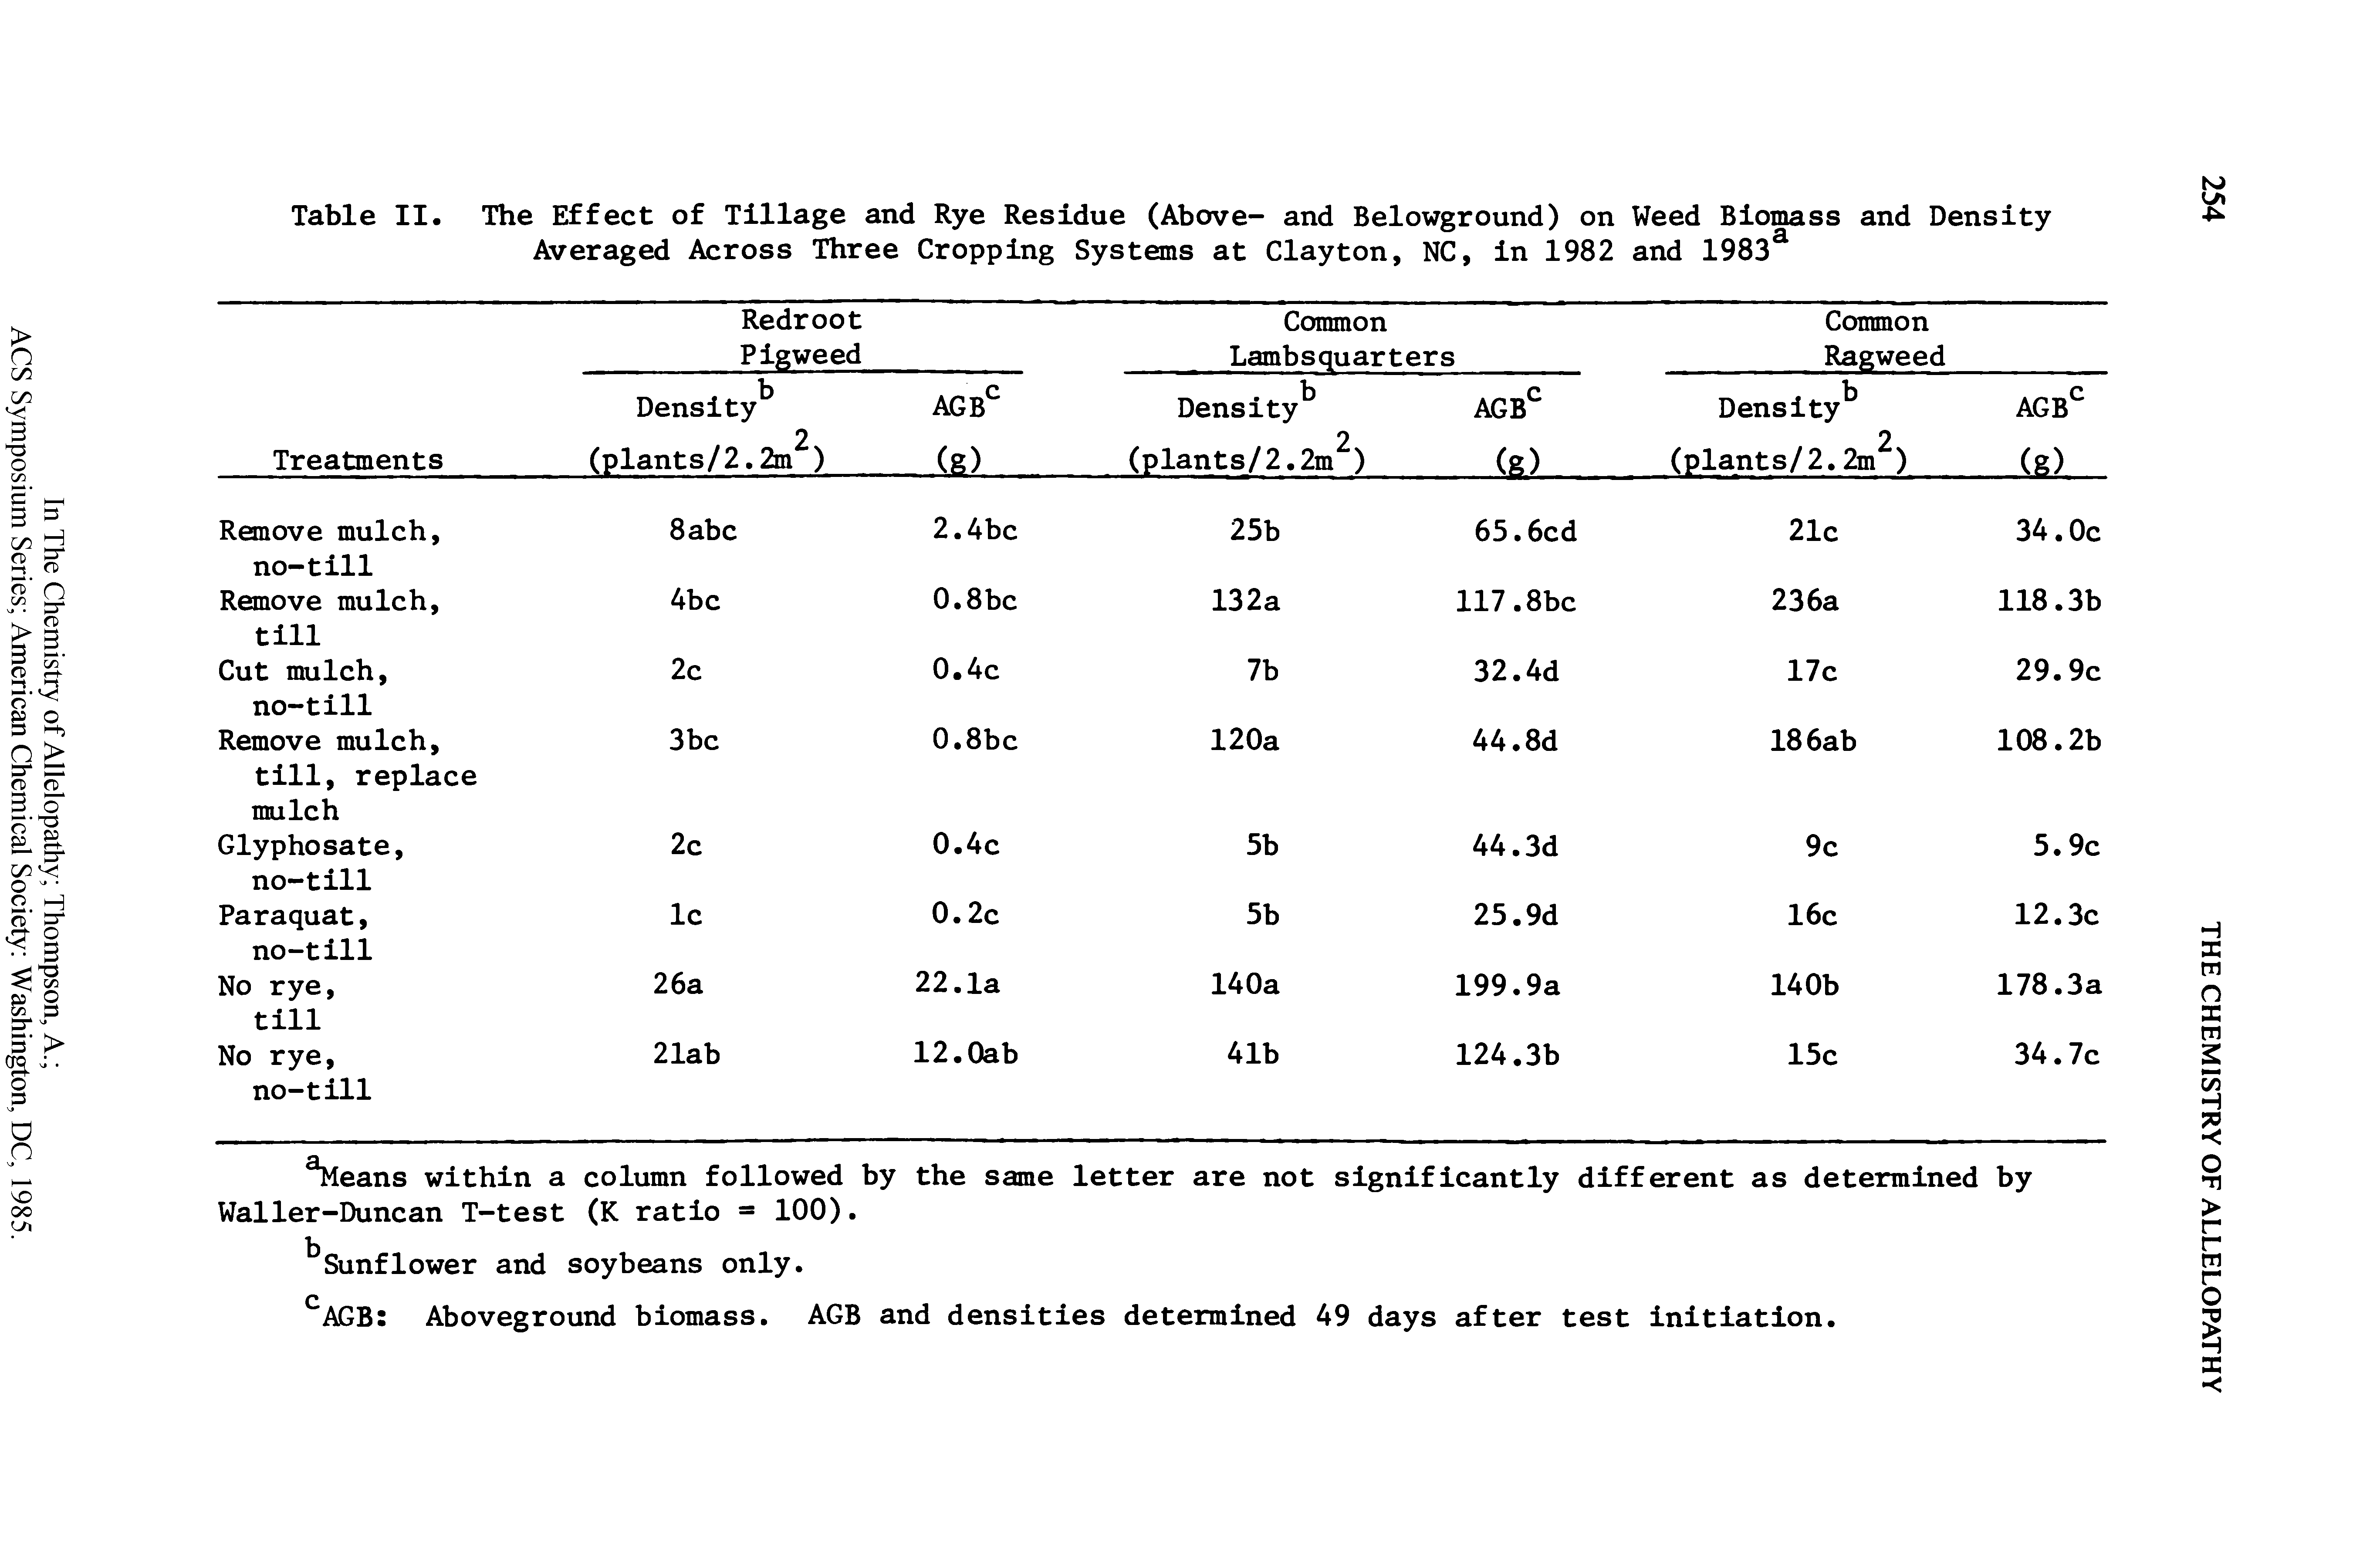 Table II. The Effect of Tillage and Rye Residue (Above- and Belowground) on Weed Biomass and Density Averaged Across Three Cropping Systems at Clayton, NC, in 1982 and 1983a...